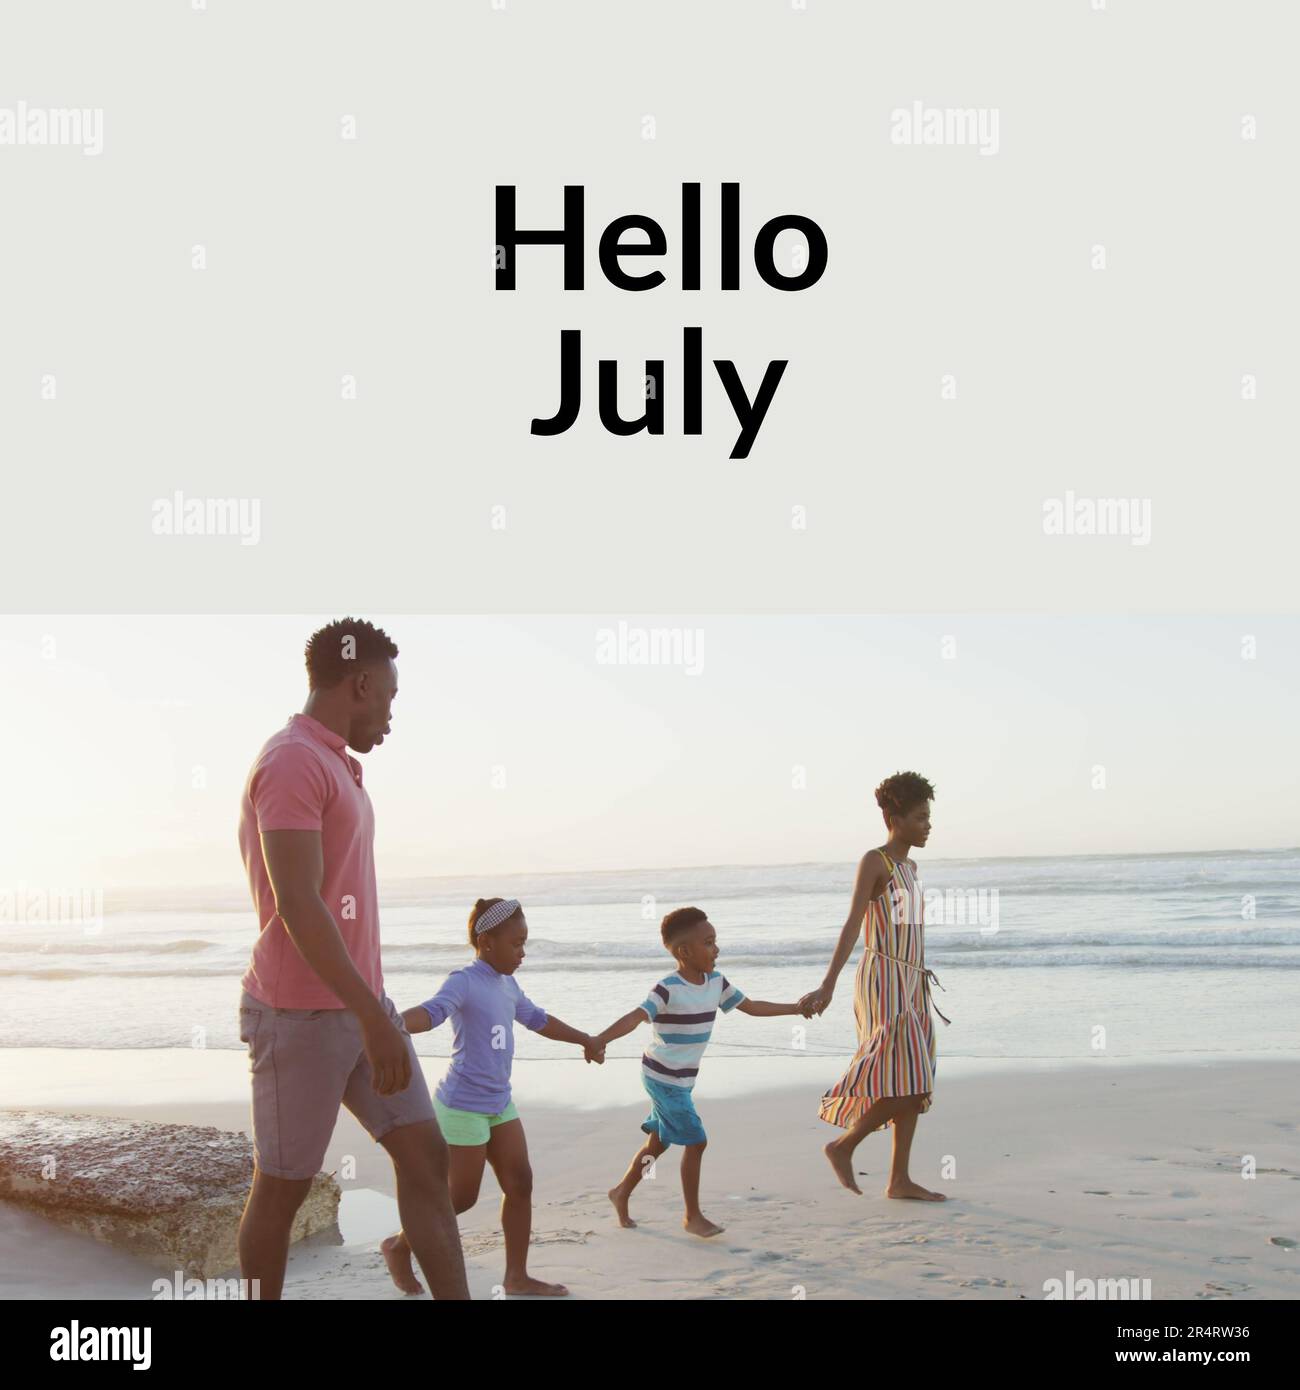 Composition of hello july text over african american couple with son and daughter on beach Stock Photo